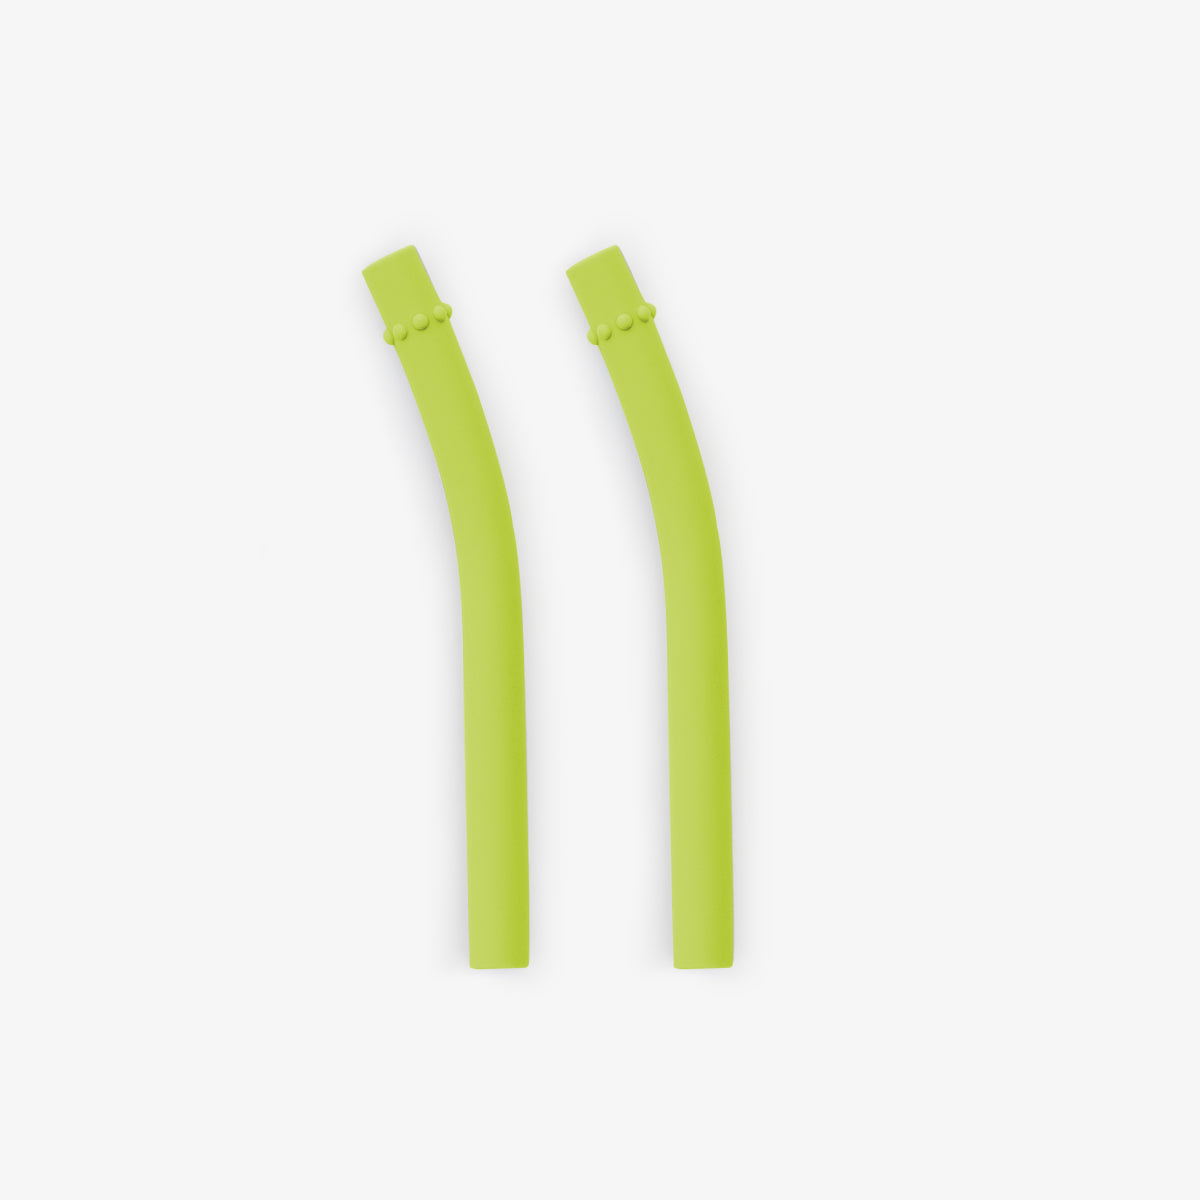 Mini Straws in Lime / Silicone Straw Replacement Pack for the ezpz Mini Cup & Straw System